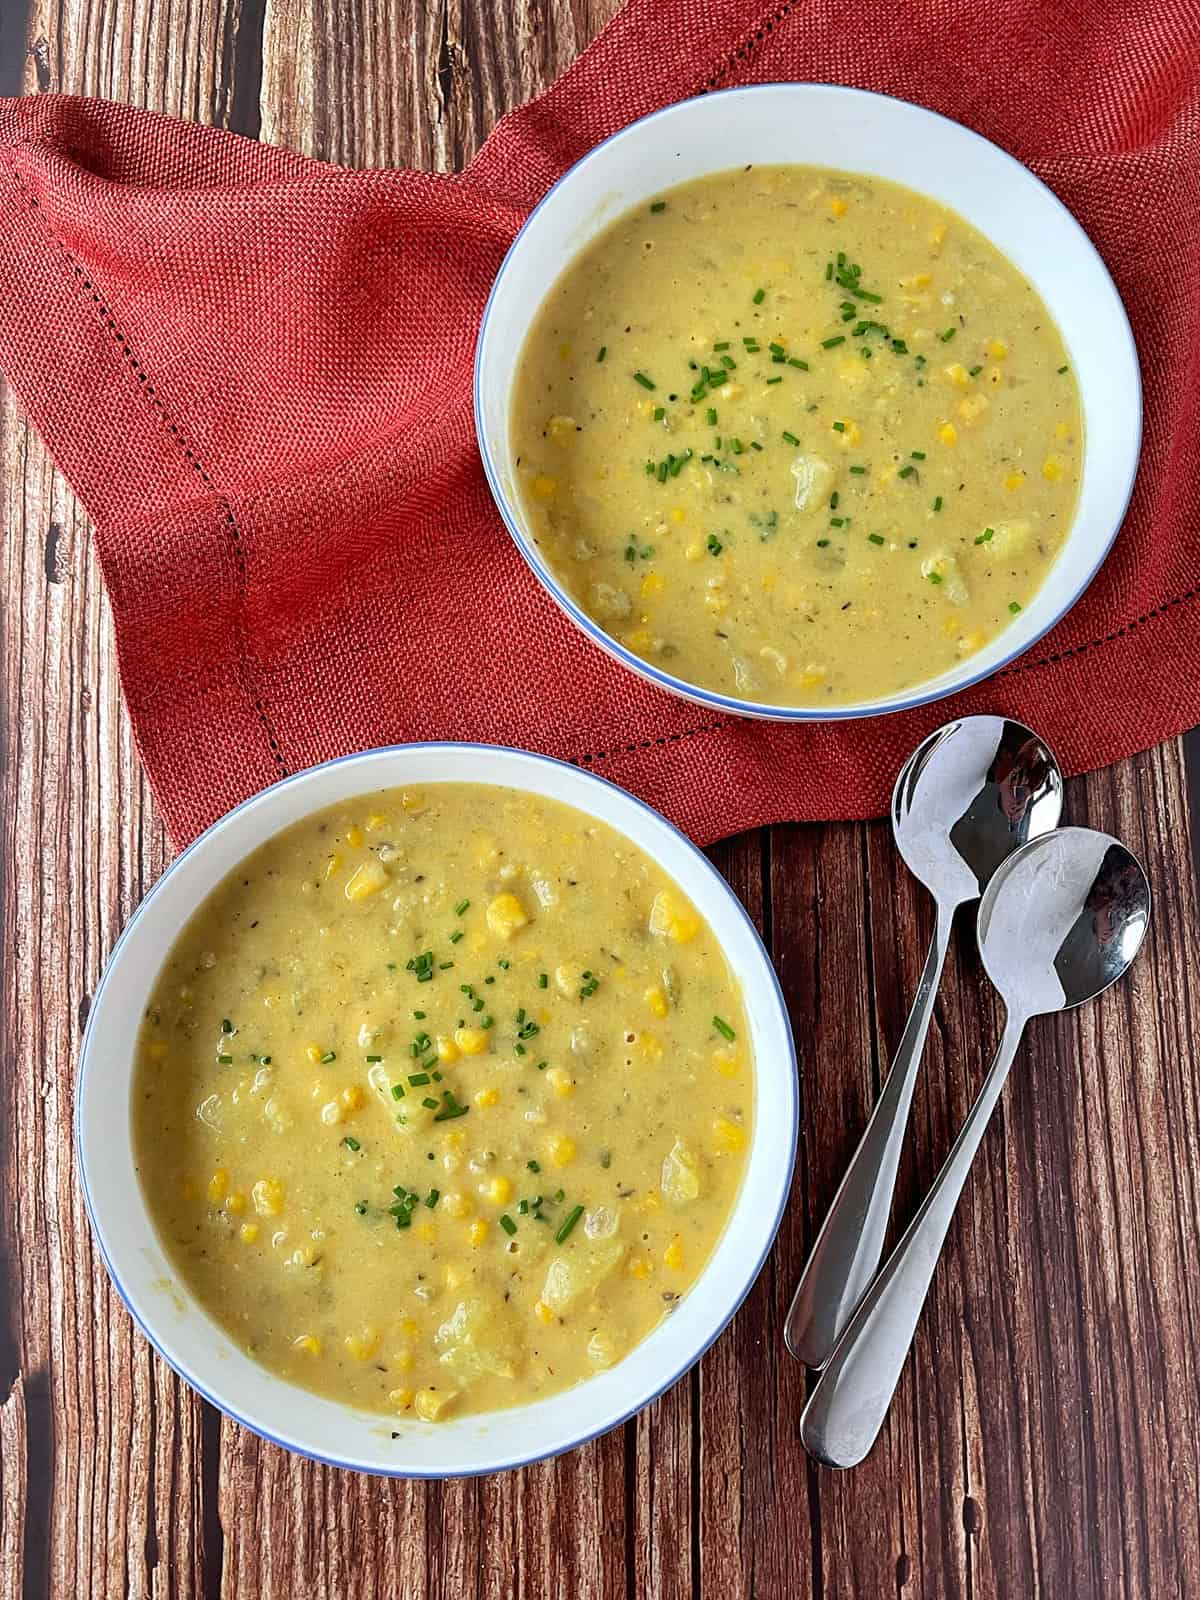 Two white bowls of corn and potato chowder on a wooden table